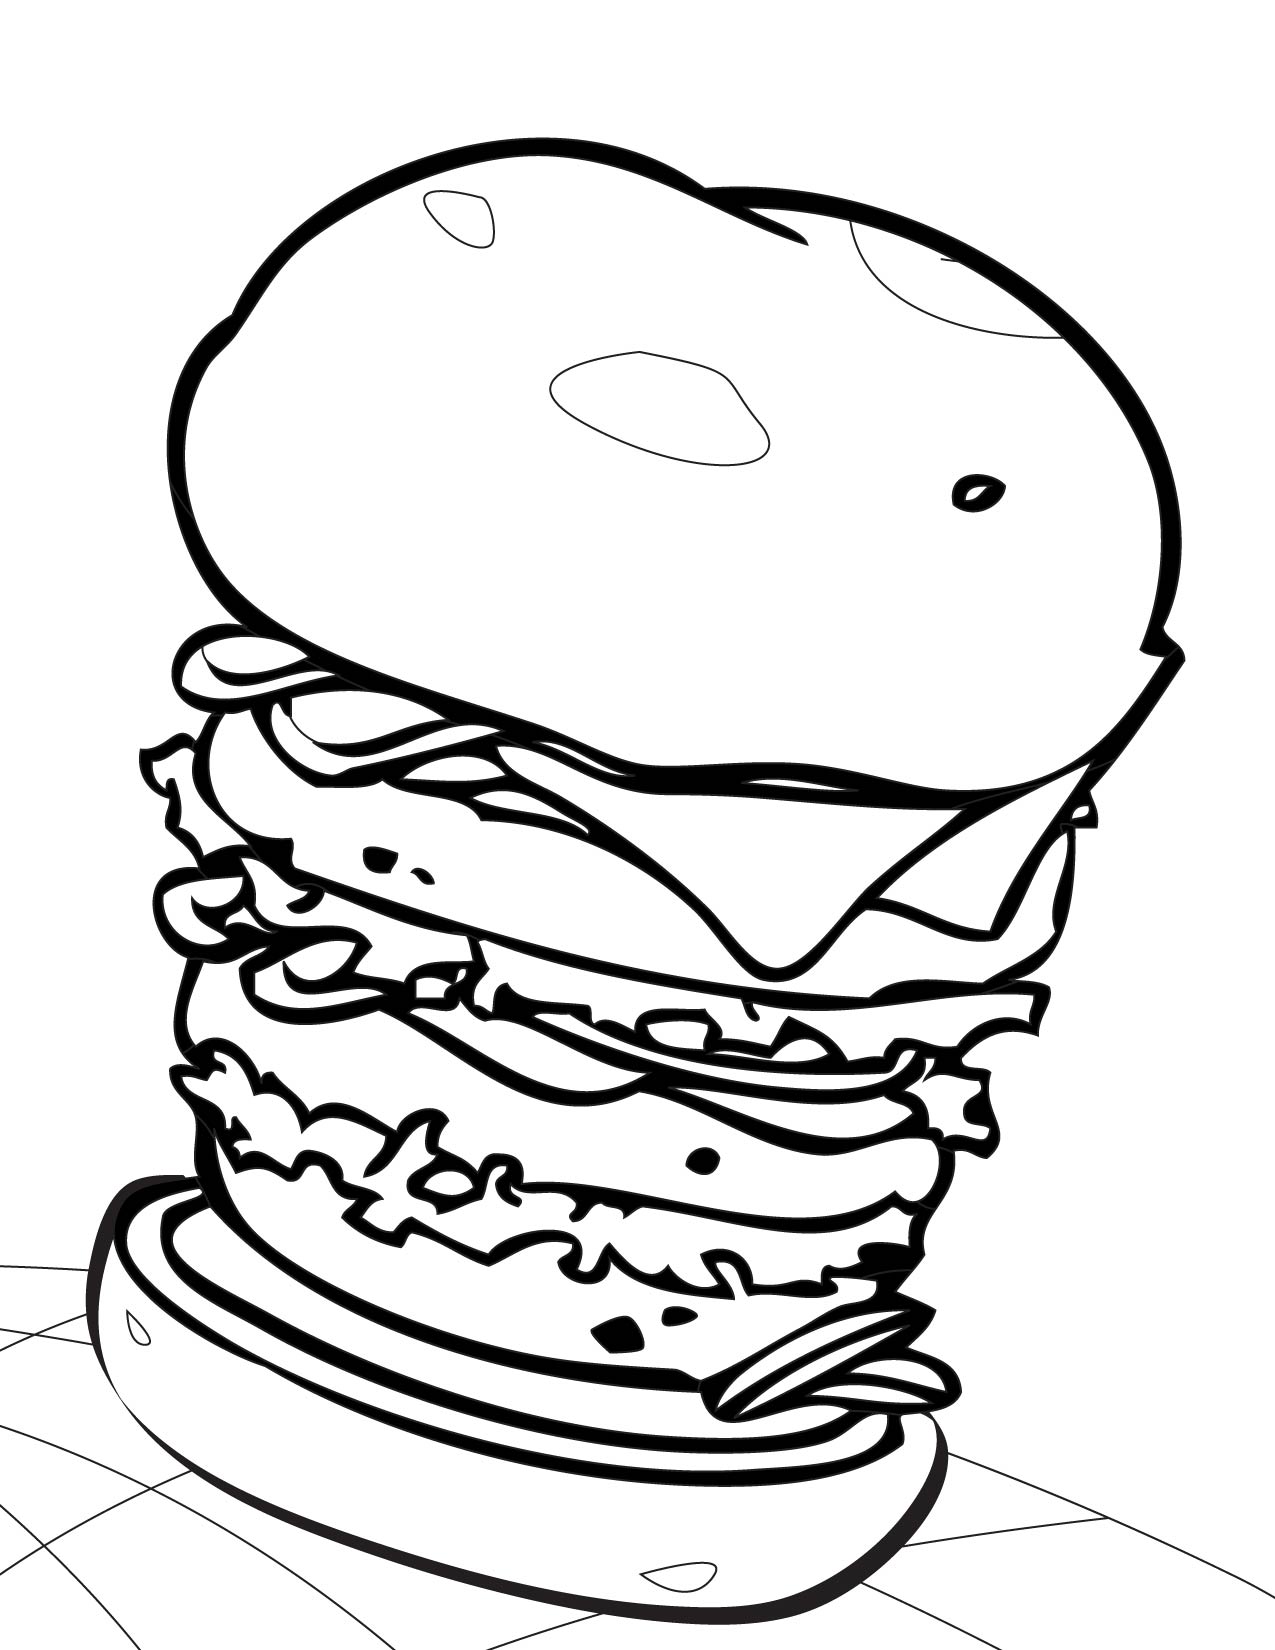 Hamburger Coloring Pages   Best Coloring Pages For Kids